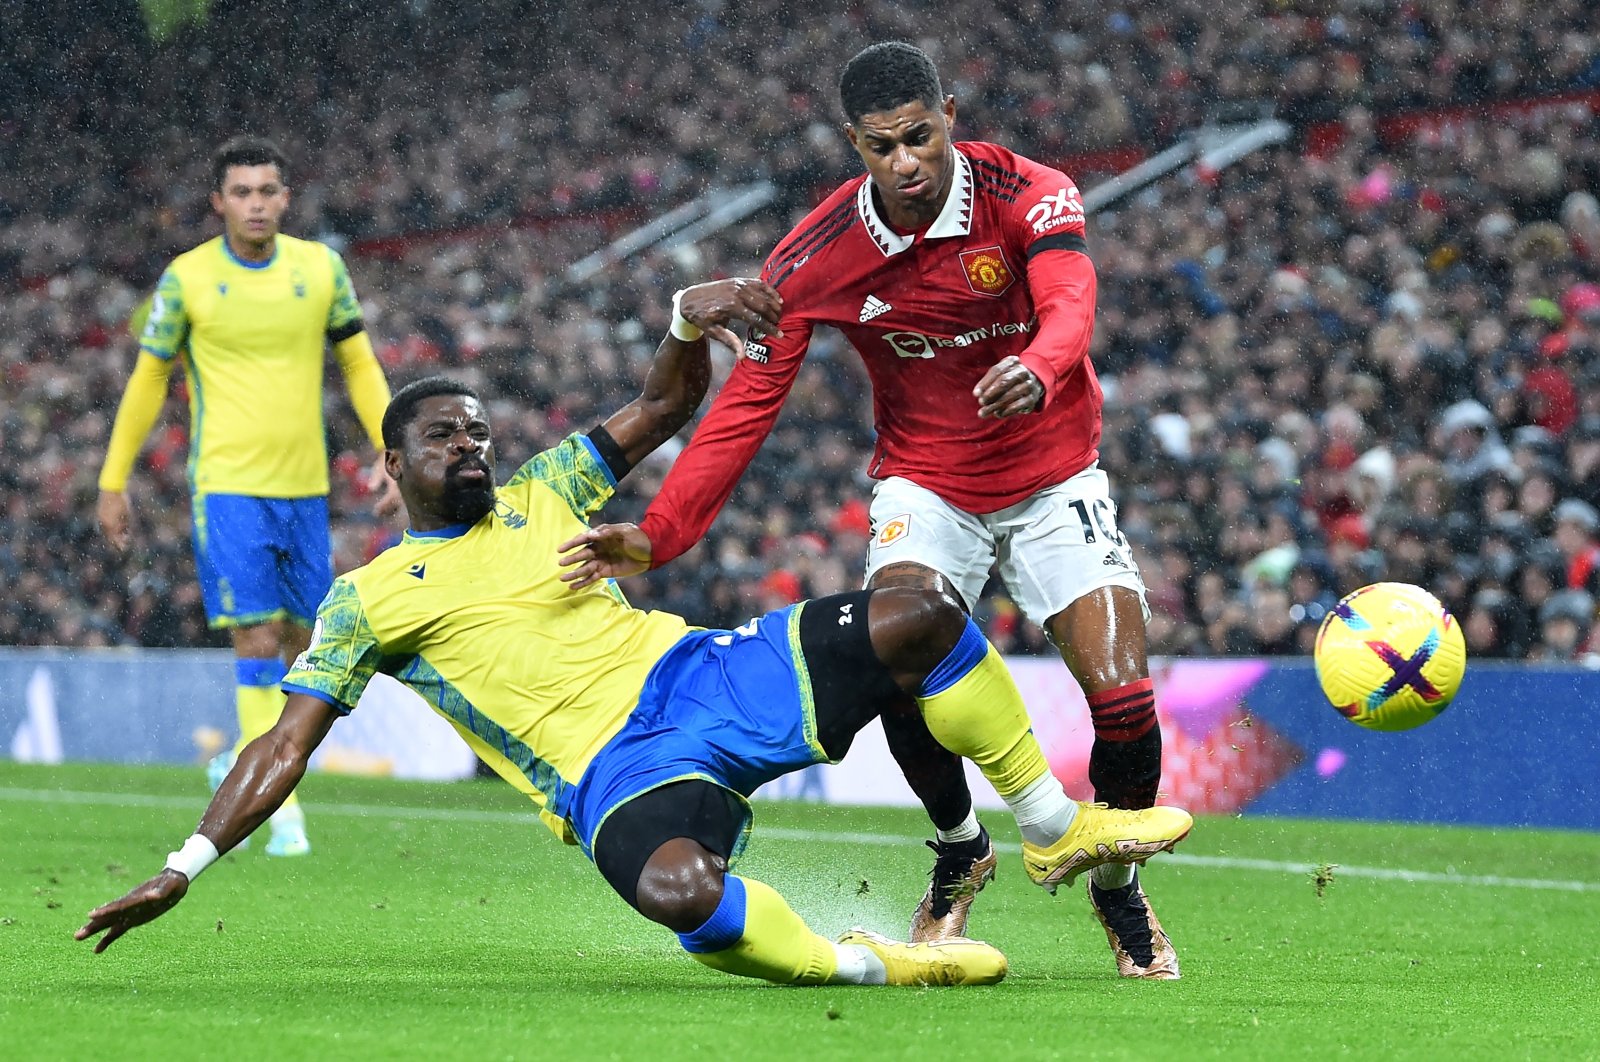 Marcus Rashford (R) in action against Serge Aurier during an EPL match between Manchester United and Nottingham Forest, Manchester, UK, Dec. 27 2022. (EPA Photo)